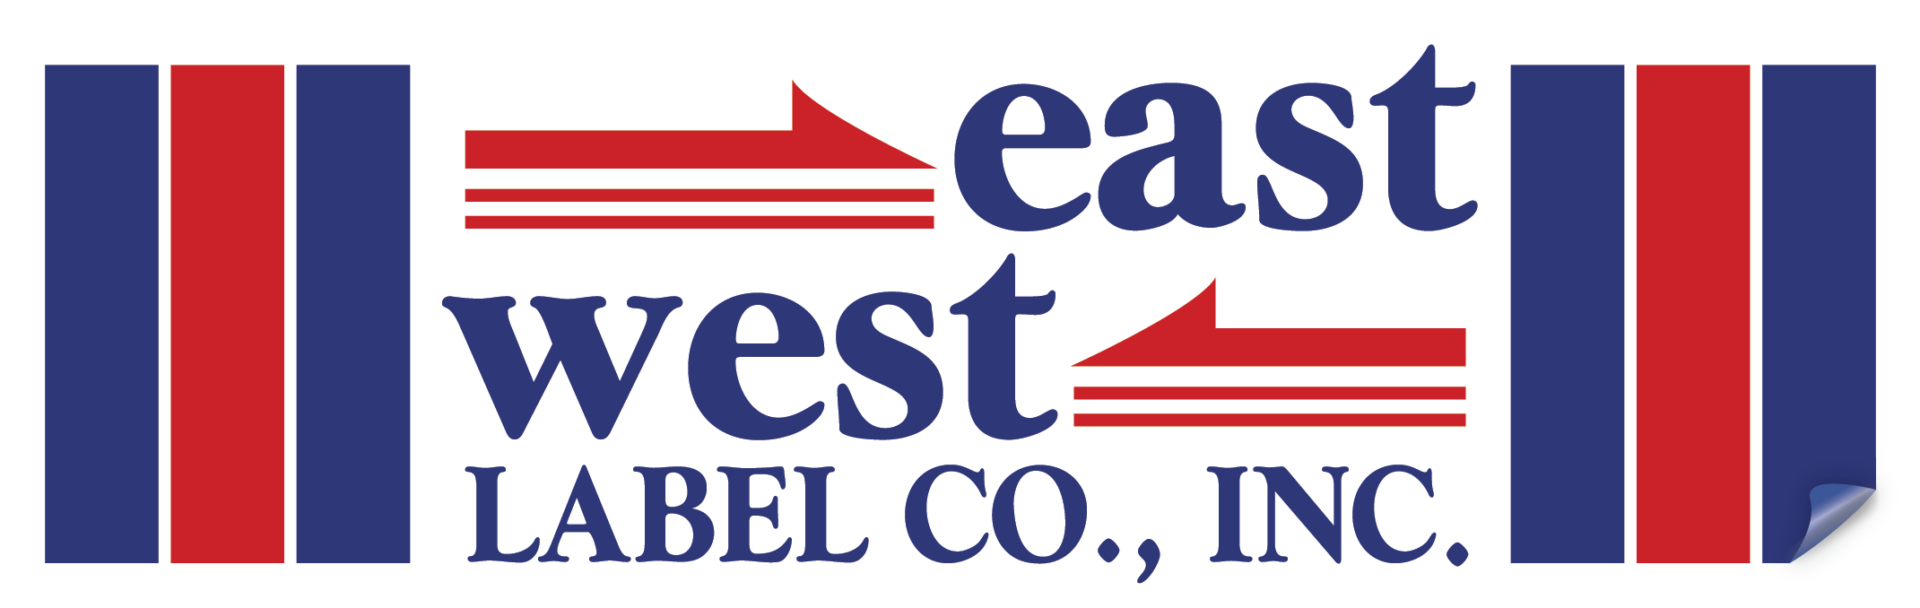 East West Label Company logo